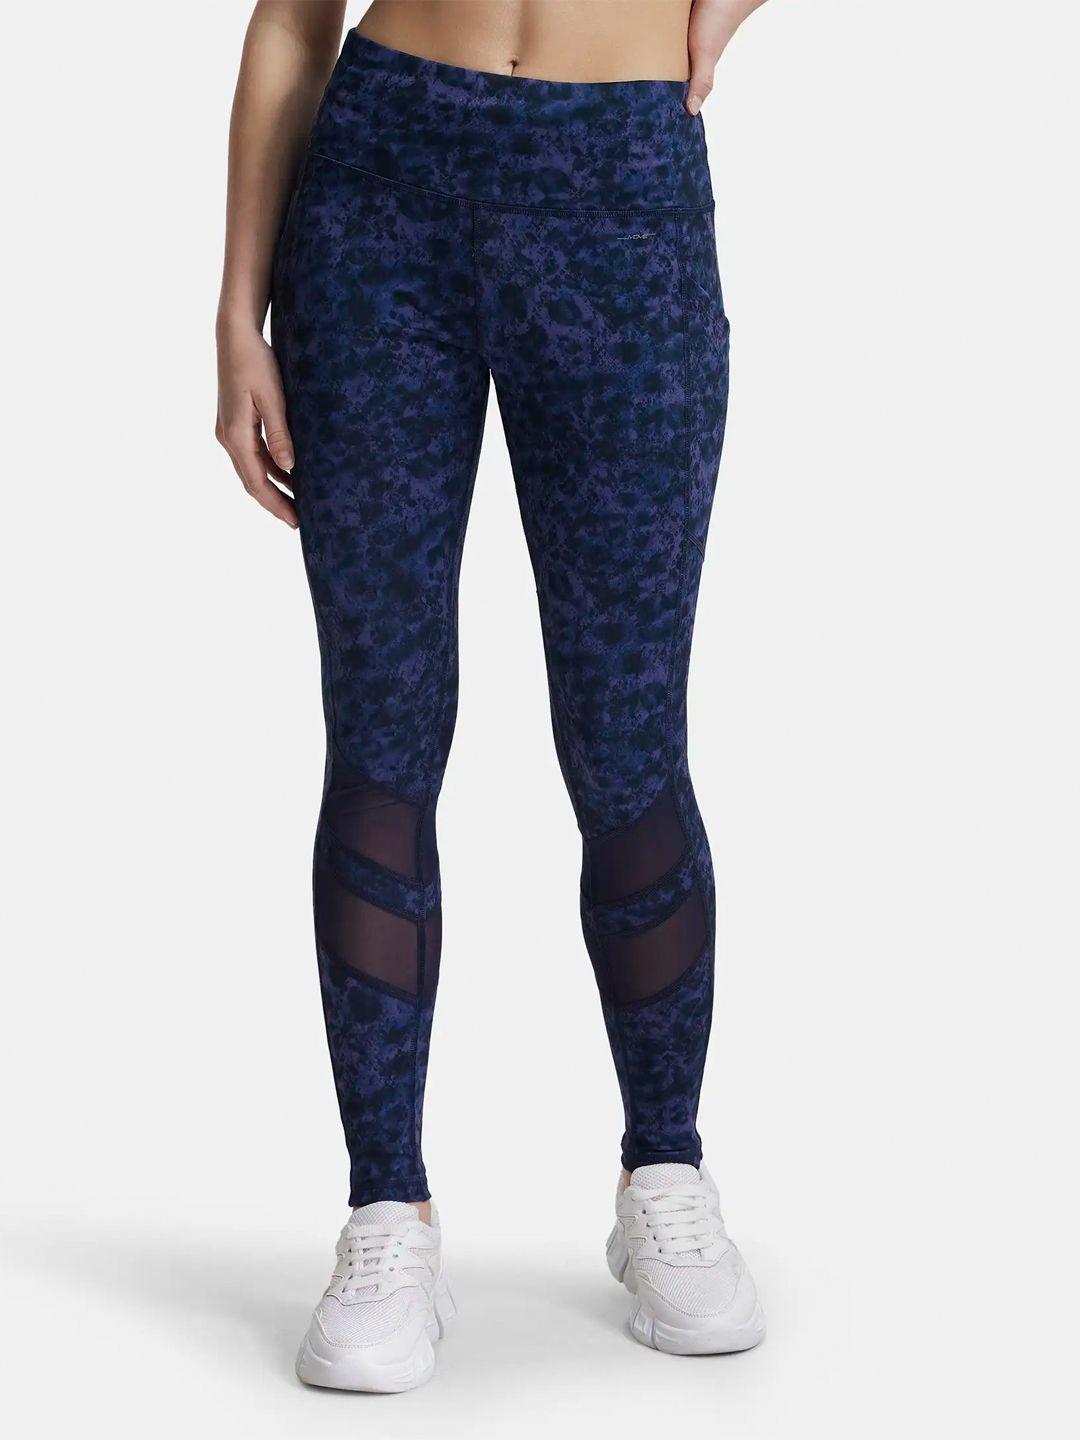 jockey-women-abstract-printed-stay-dry-technology-sports-tights